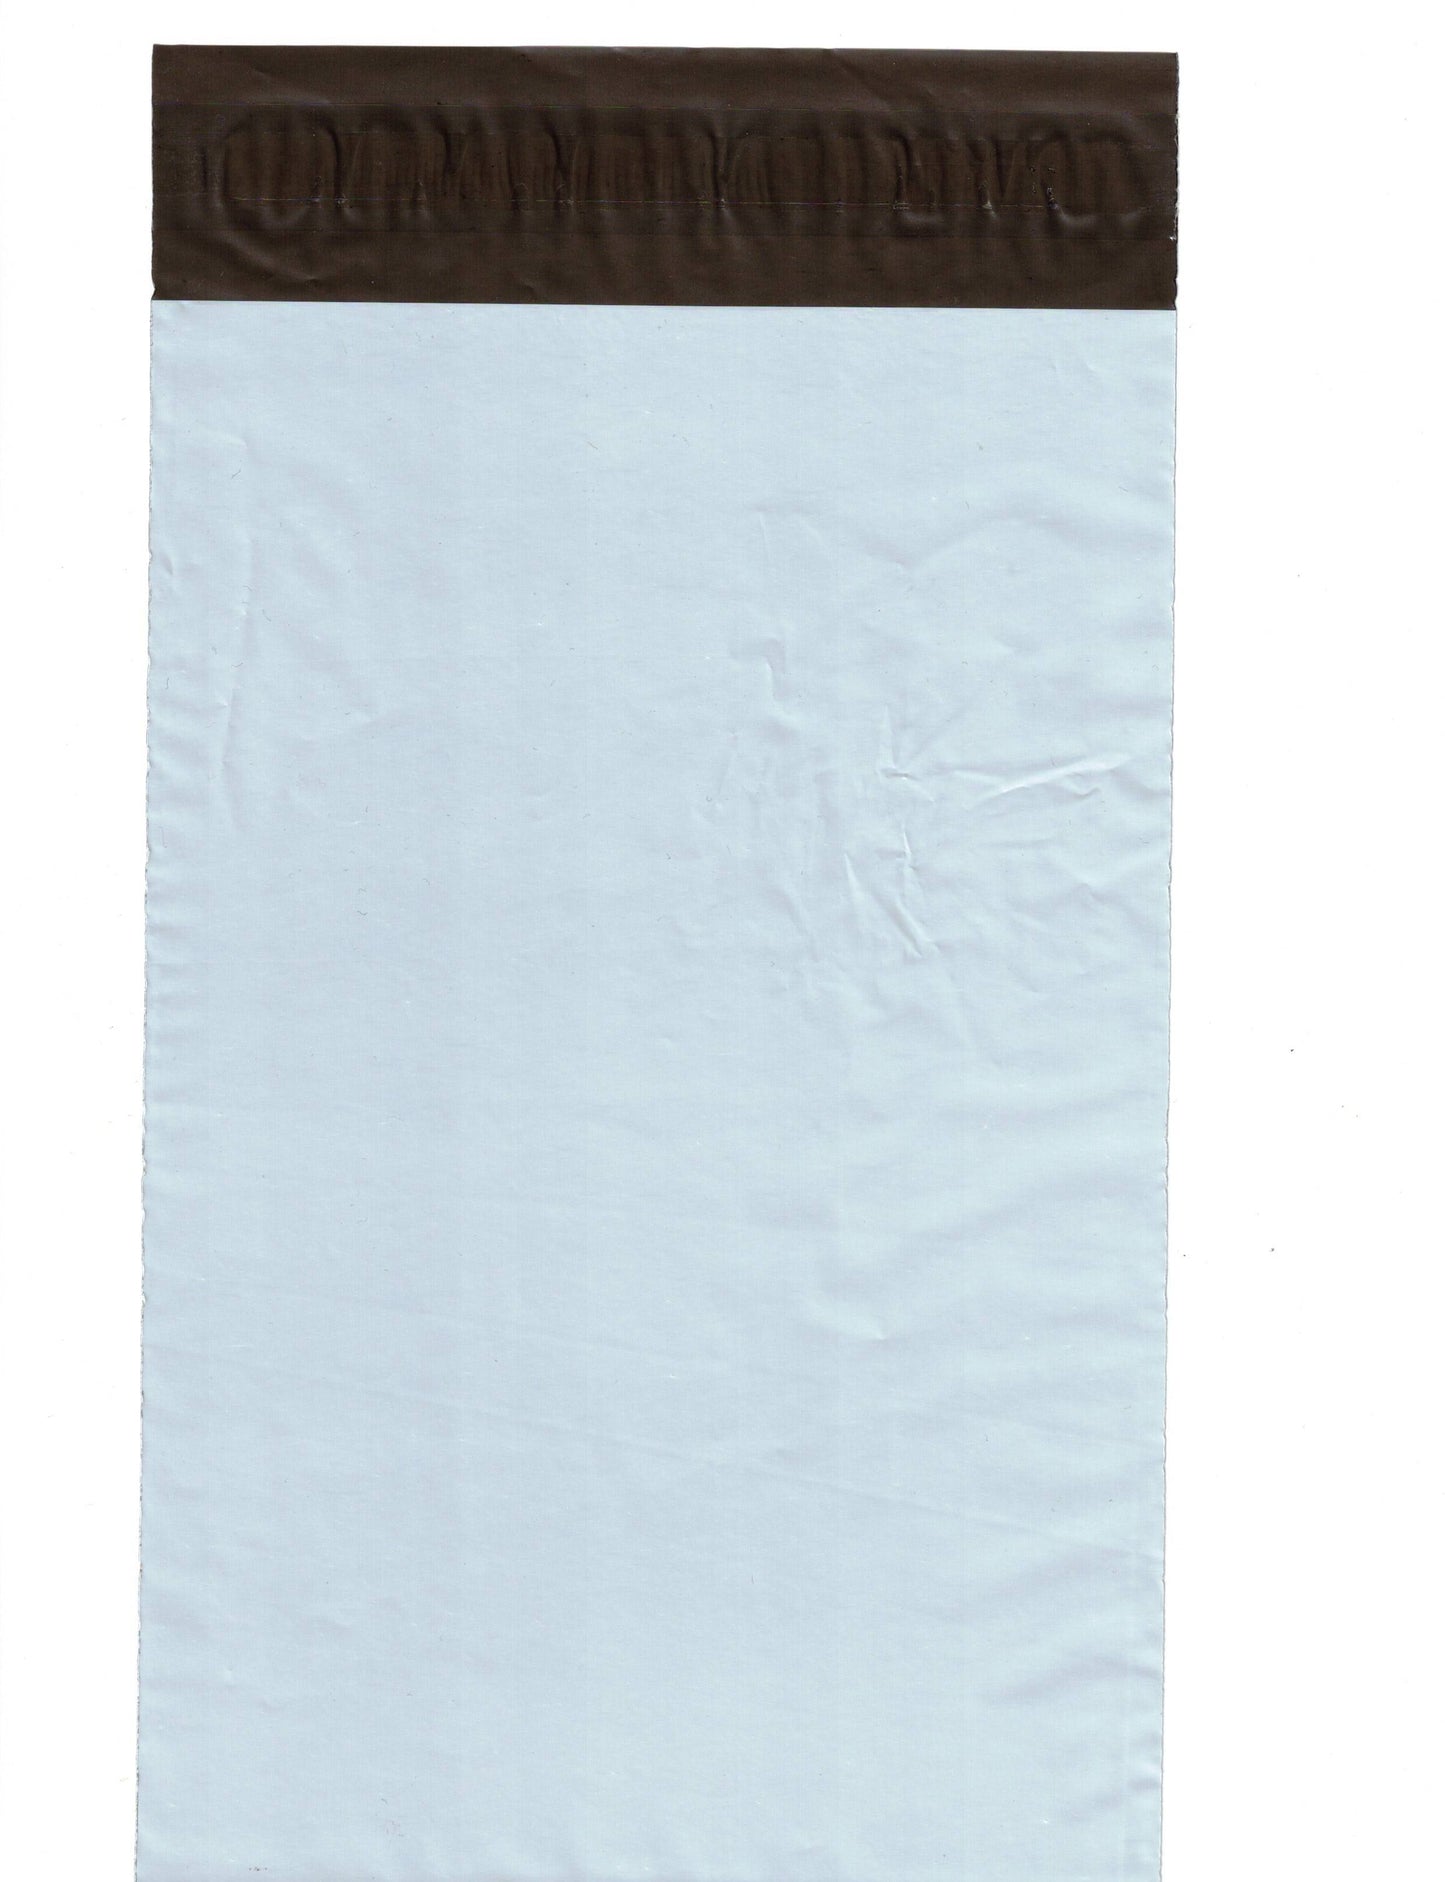 5 Pack 6"x9" Poly Mailer, Sets of 100 (White/Gray) - Self Sealing Mailing Bag Strong & Opaque